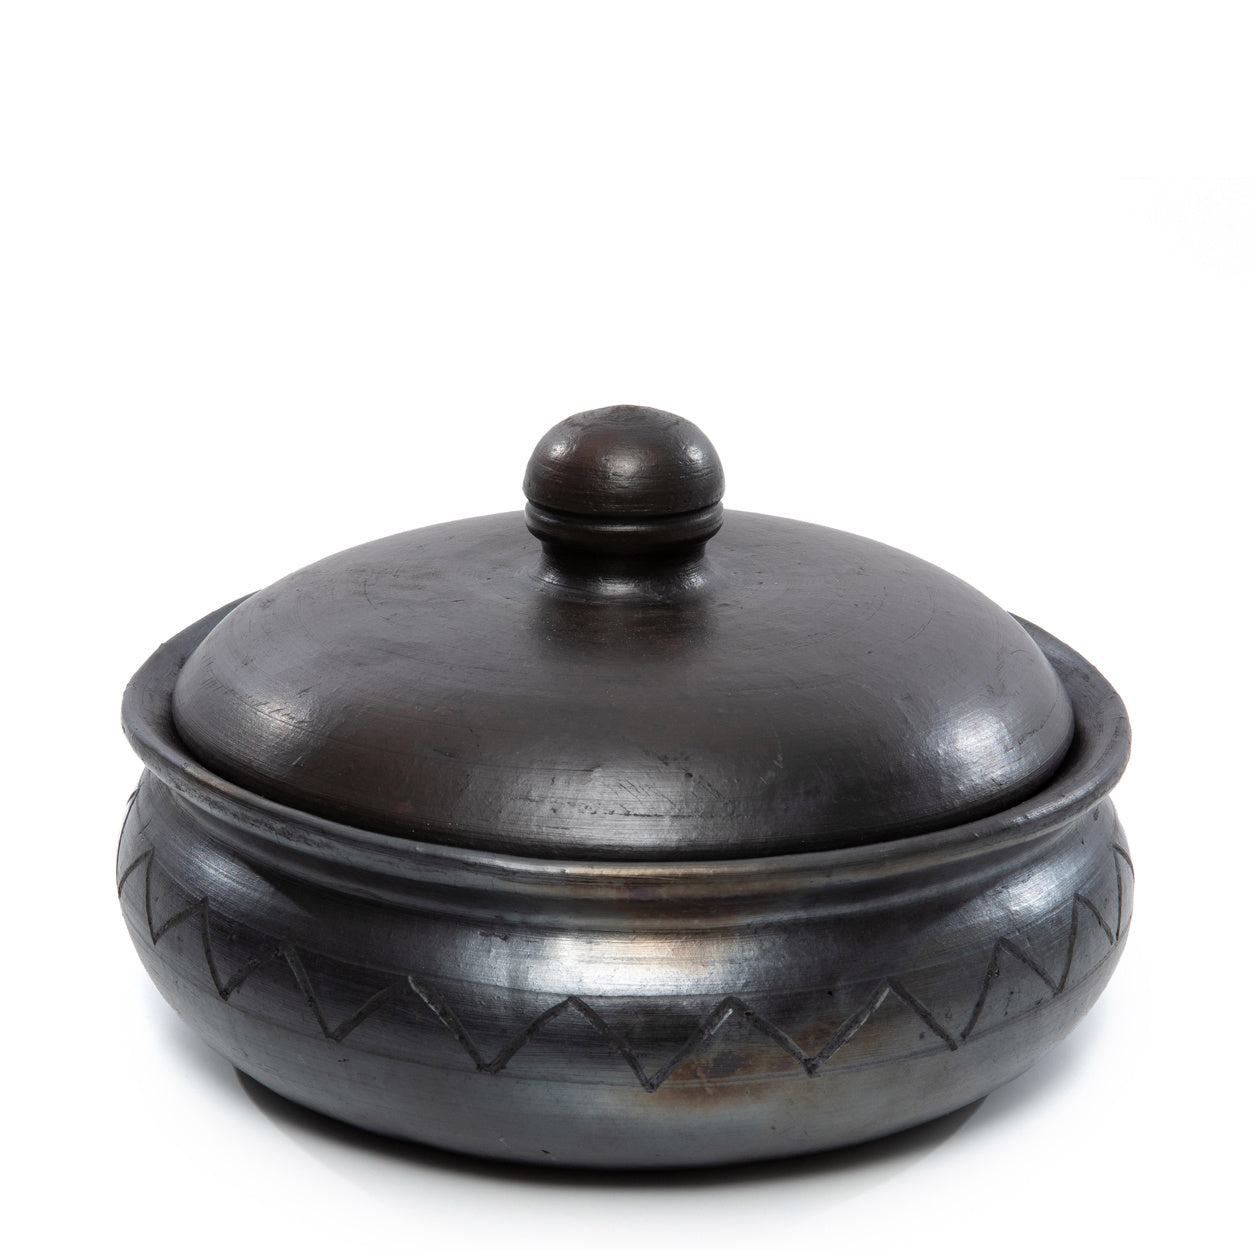 THE BURNED Curry Pot With Pattern front view